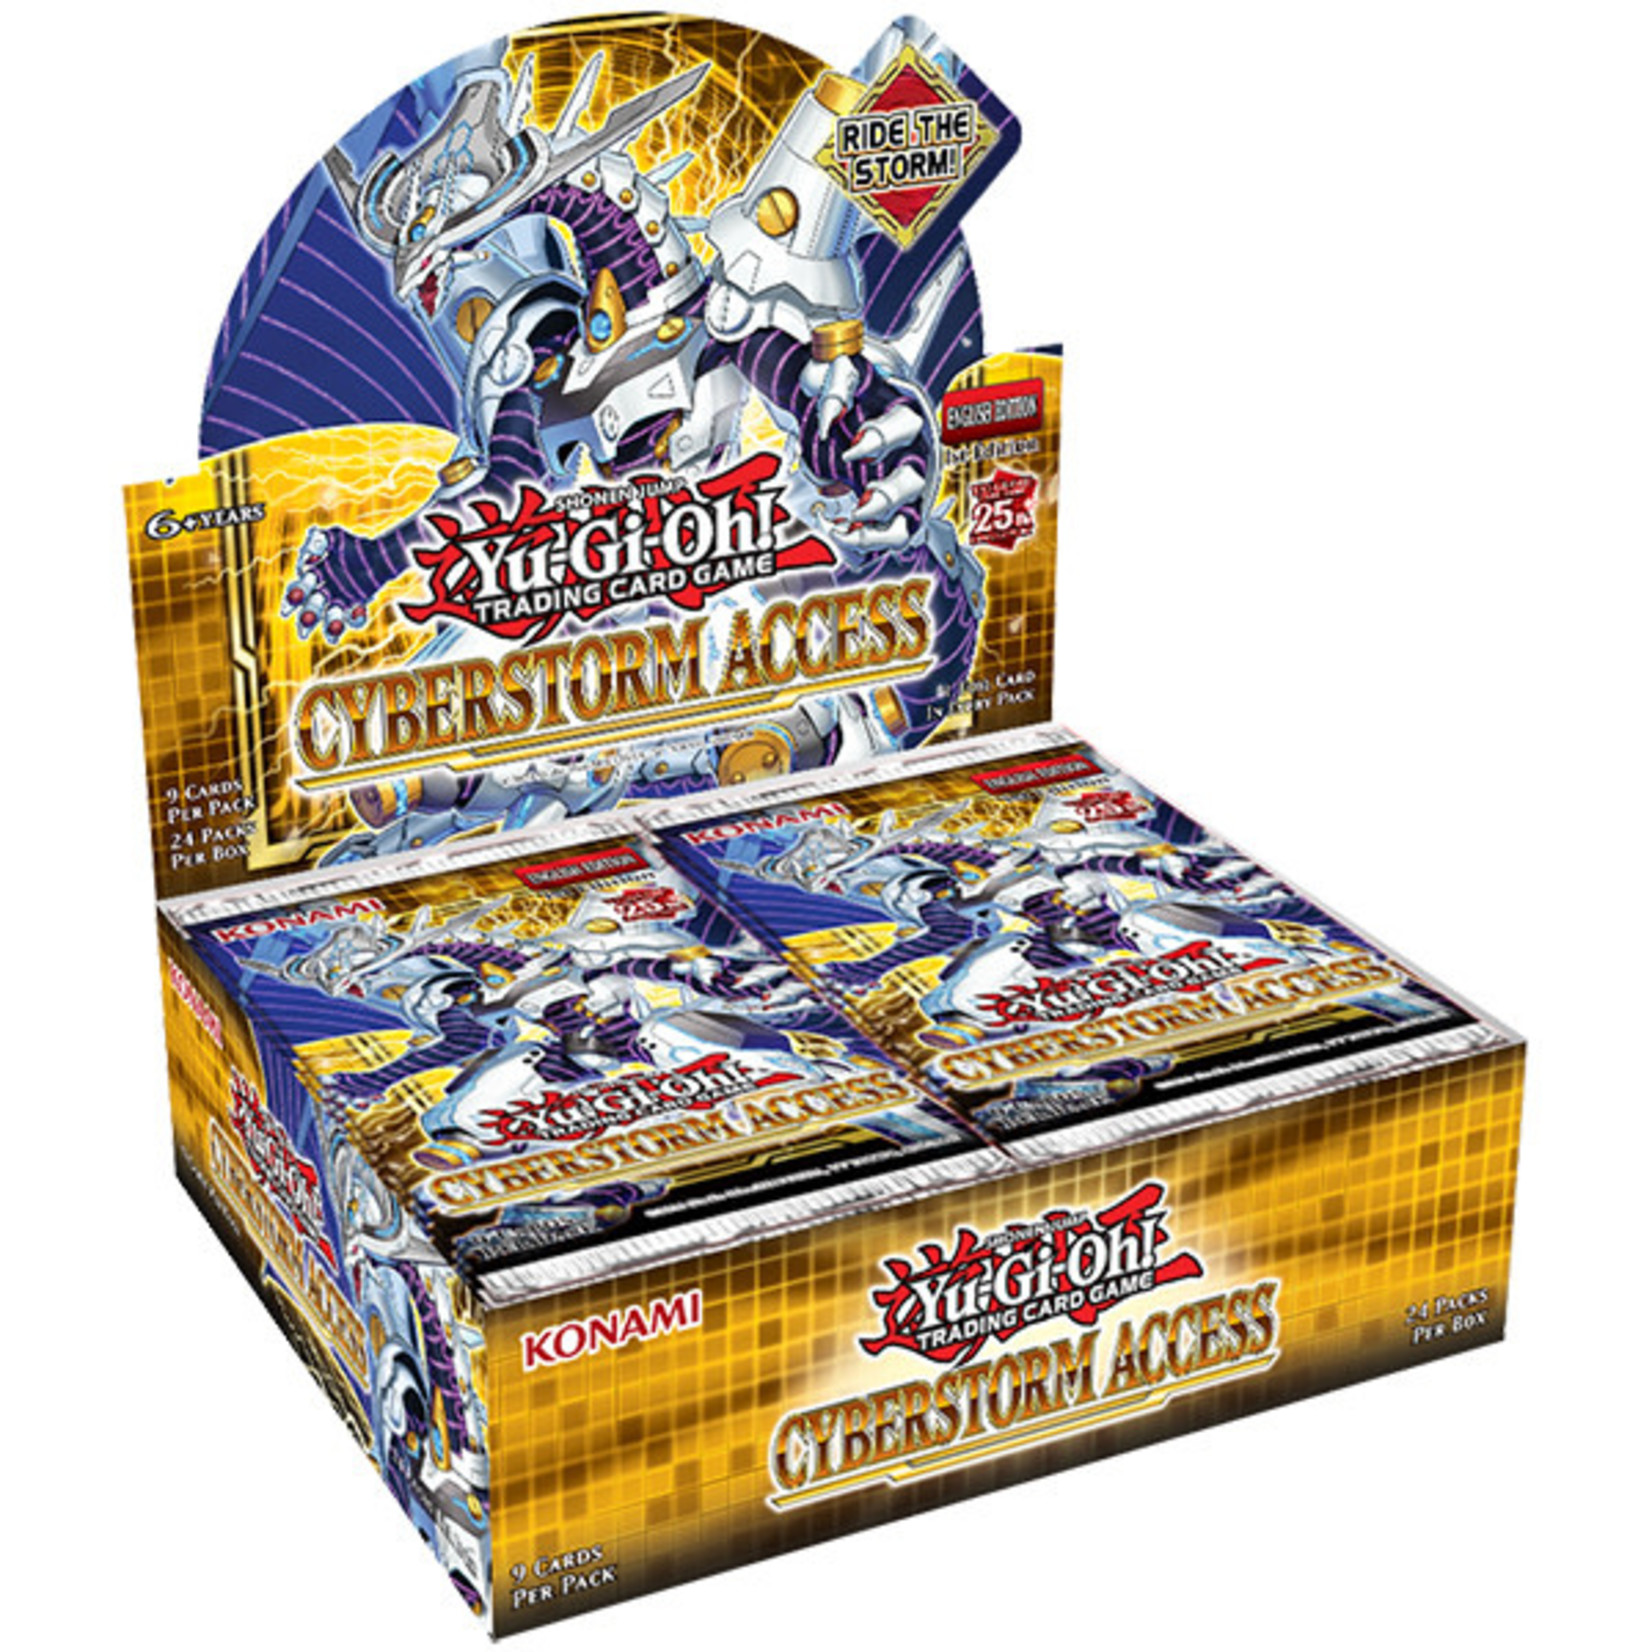 Cyberstorm Access - Booster Box